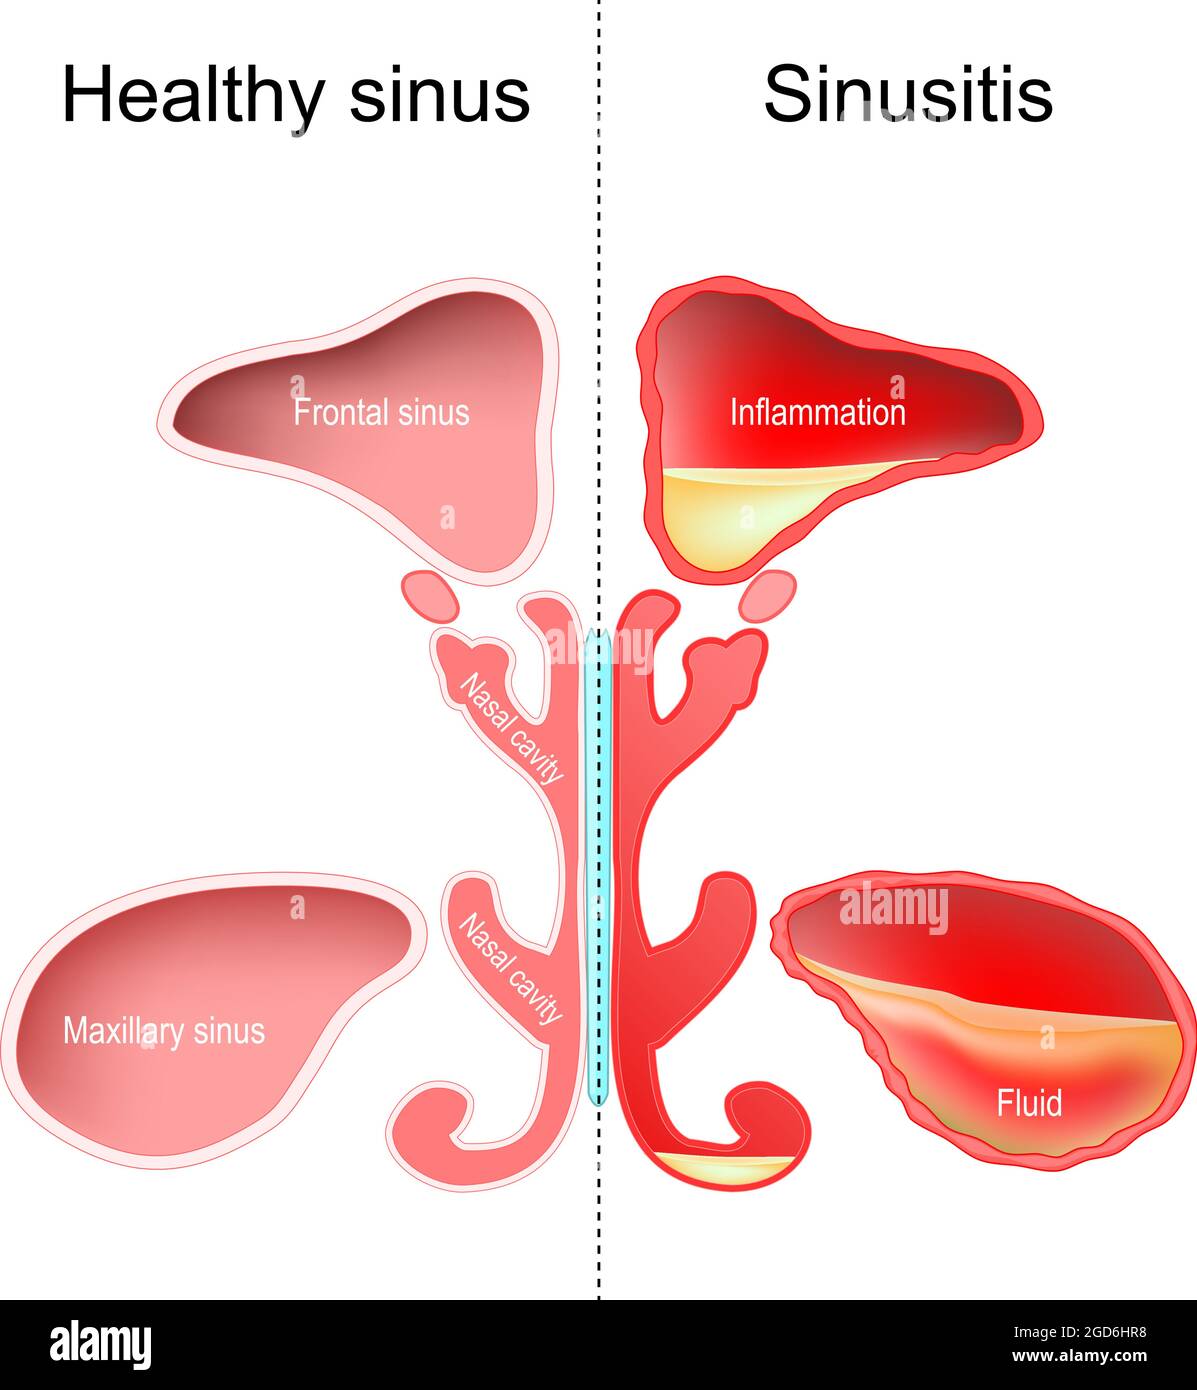 Sinusitis. Healthy nasal sinus and sinus with infection (inflammation and fluid). vector illustration Stock Vector